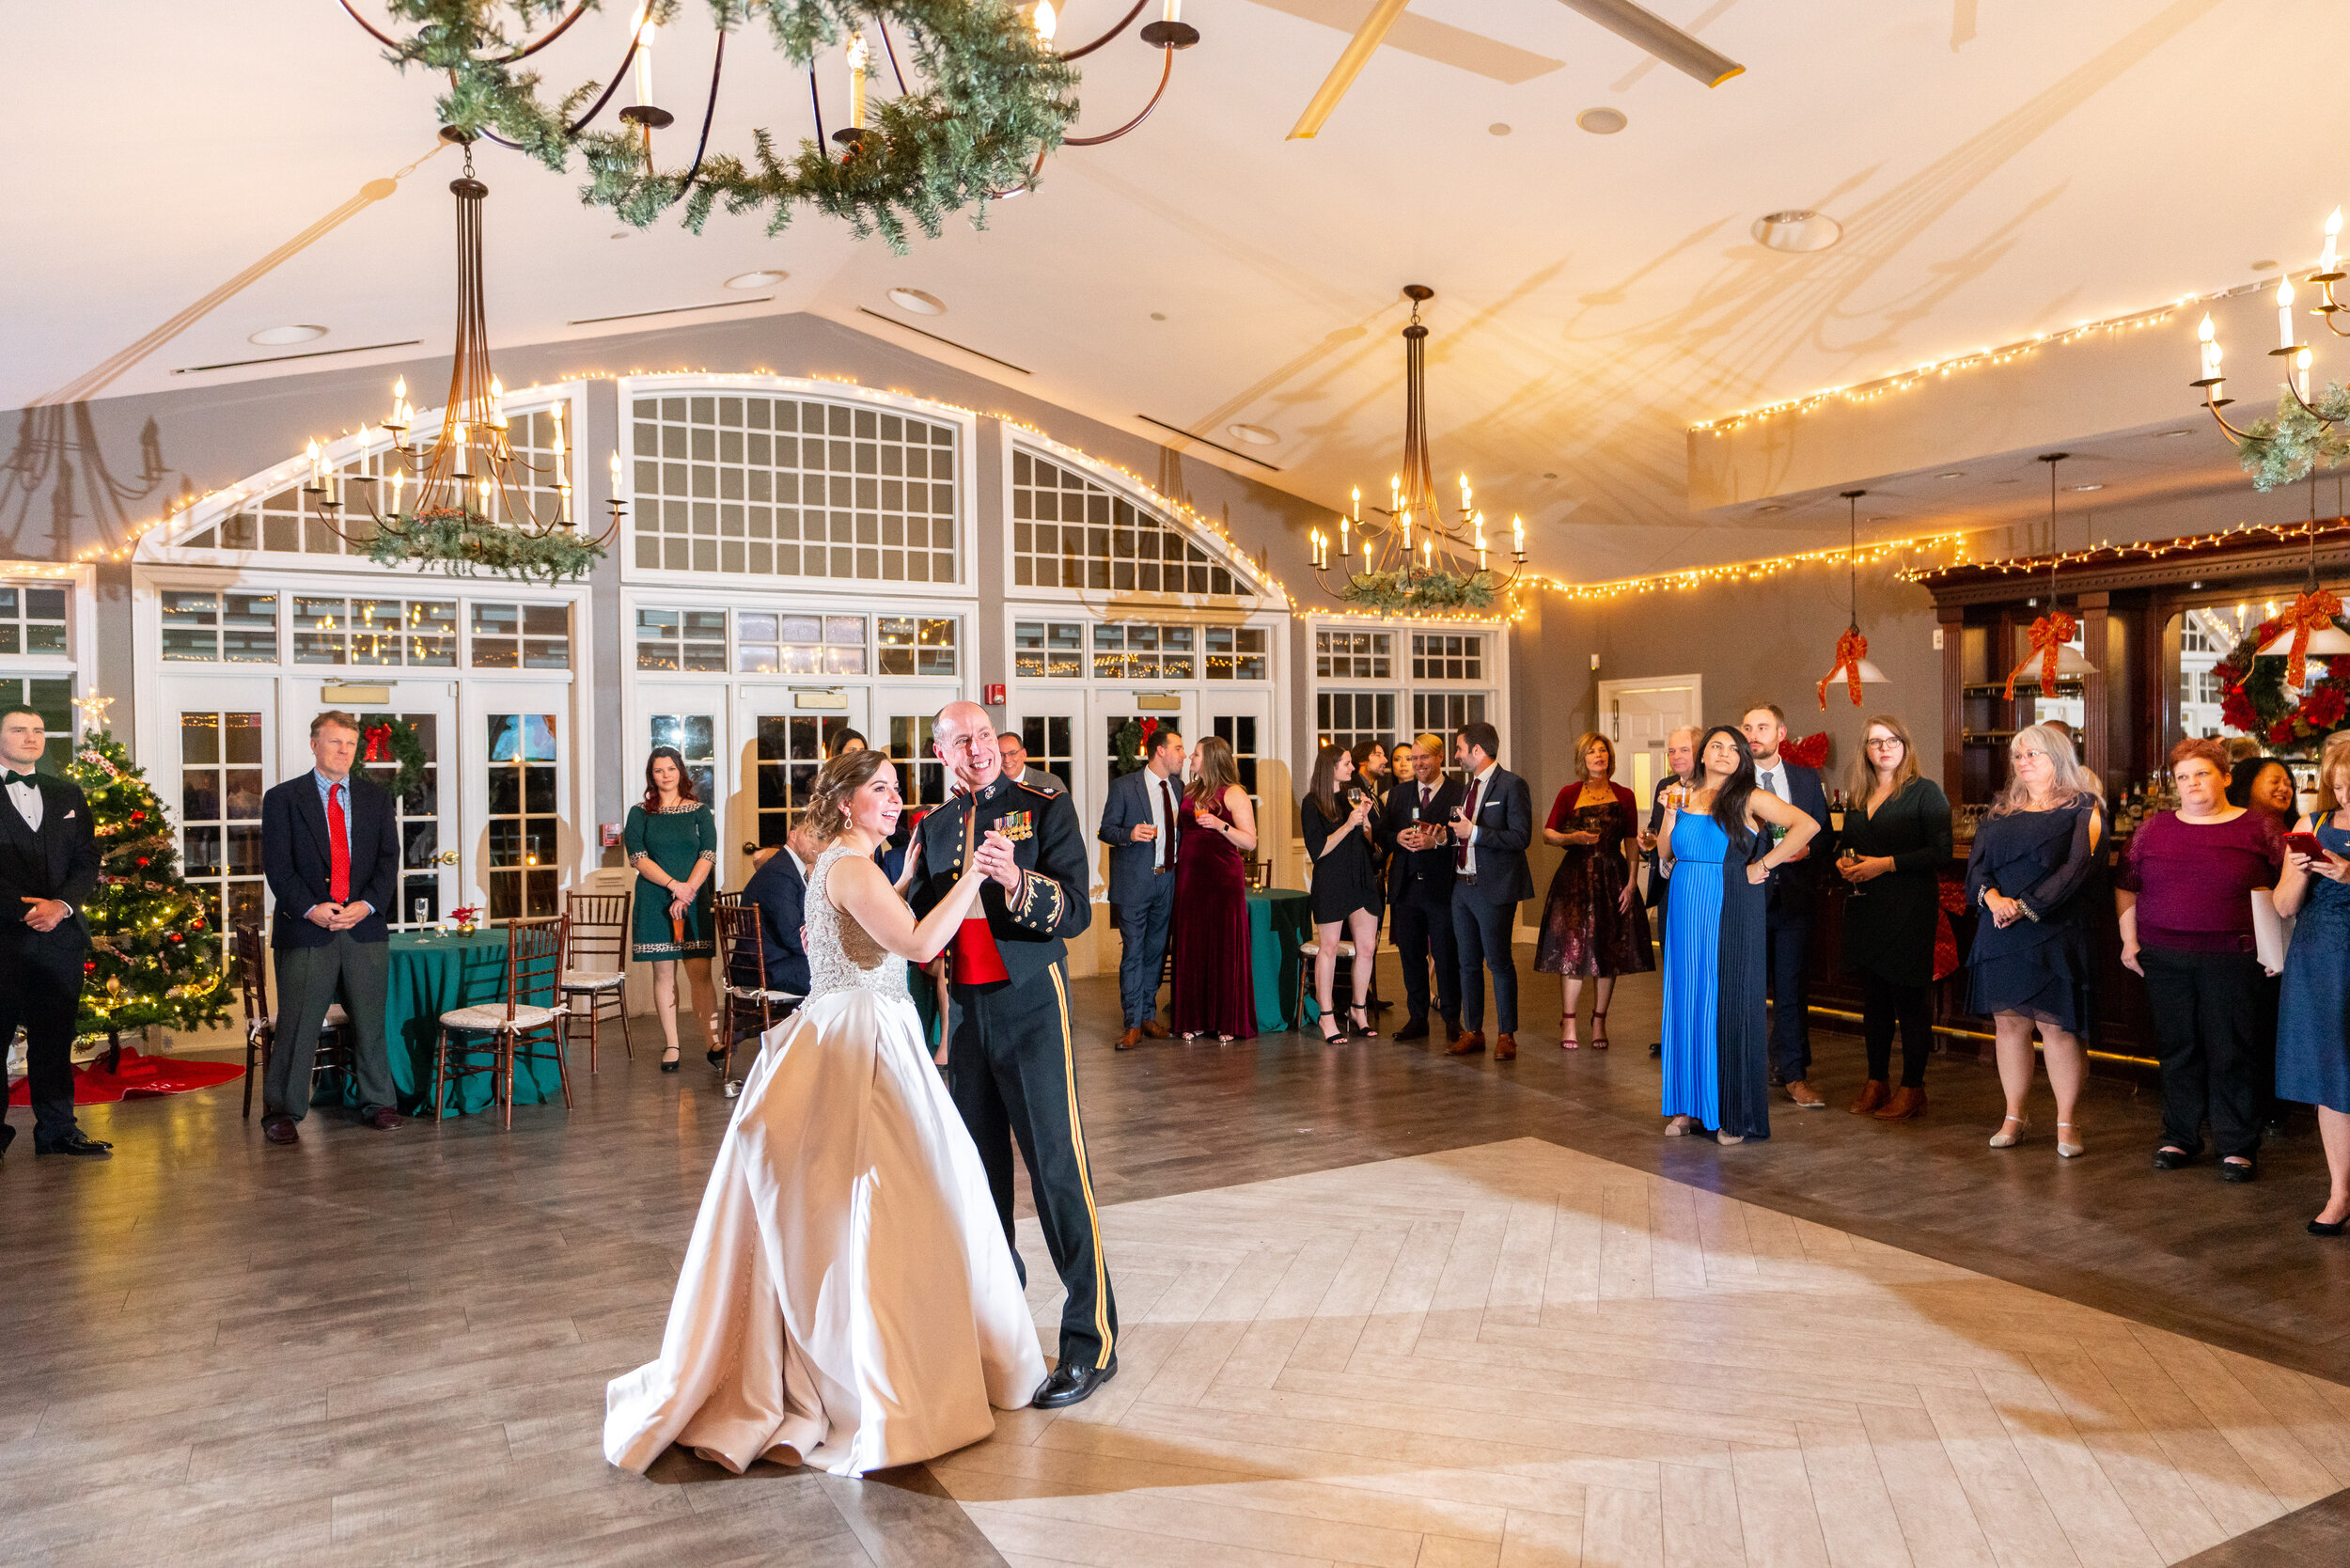 Father daughter dance at christmas wedding in virginia